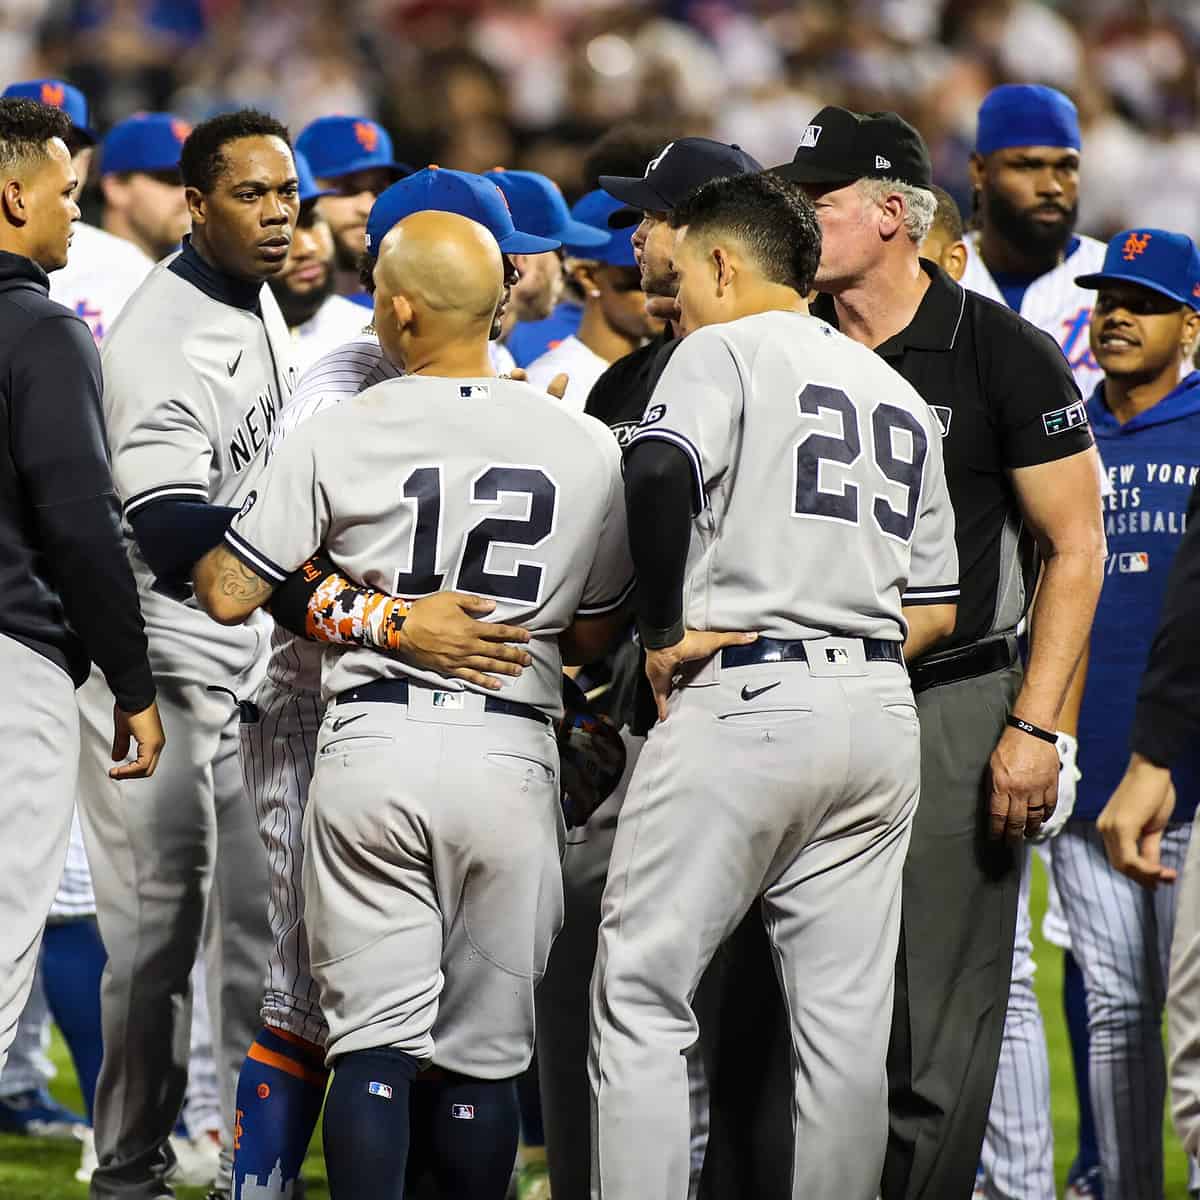 City Divided As Mets, Yankees Both Make Postseason For First Time